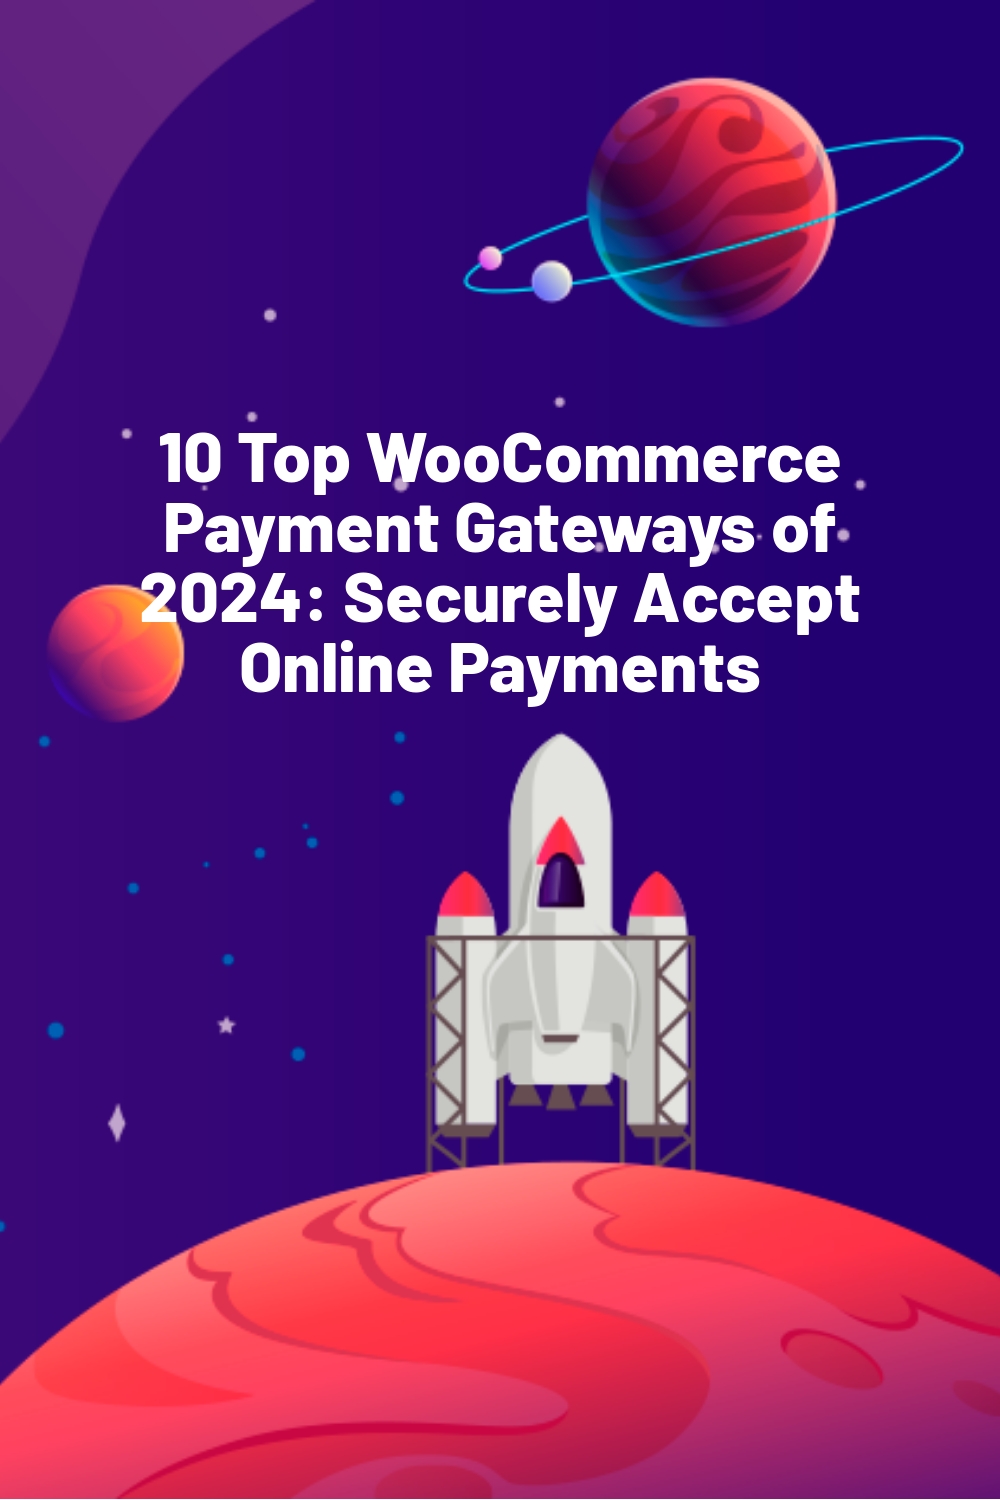 10 Top WooCommerce Payment Gateways of 2024: Securely Accept Online Payments